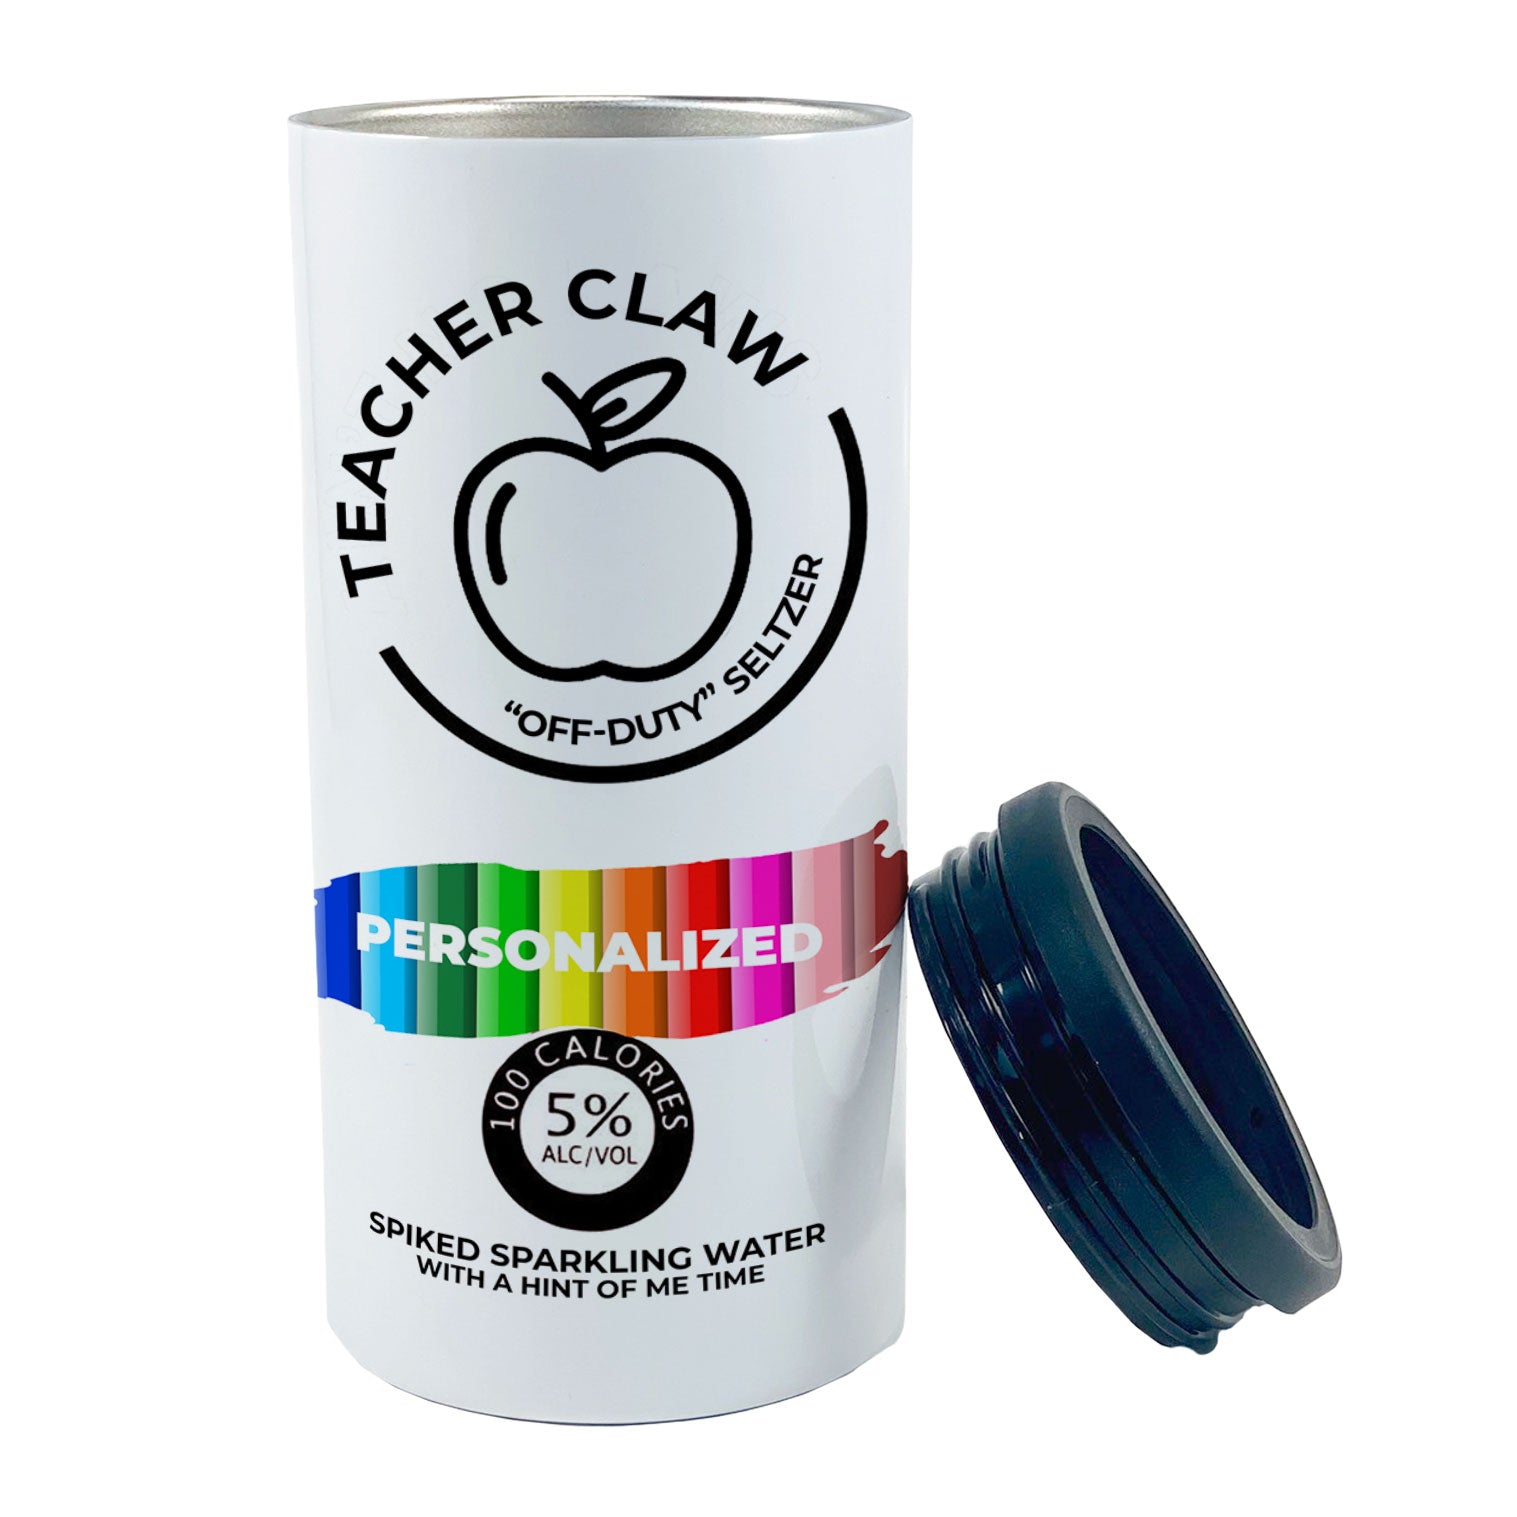 Career Collection (Teacher Claw - Personalized) 12 Oz Slim Can Cooler